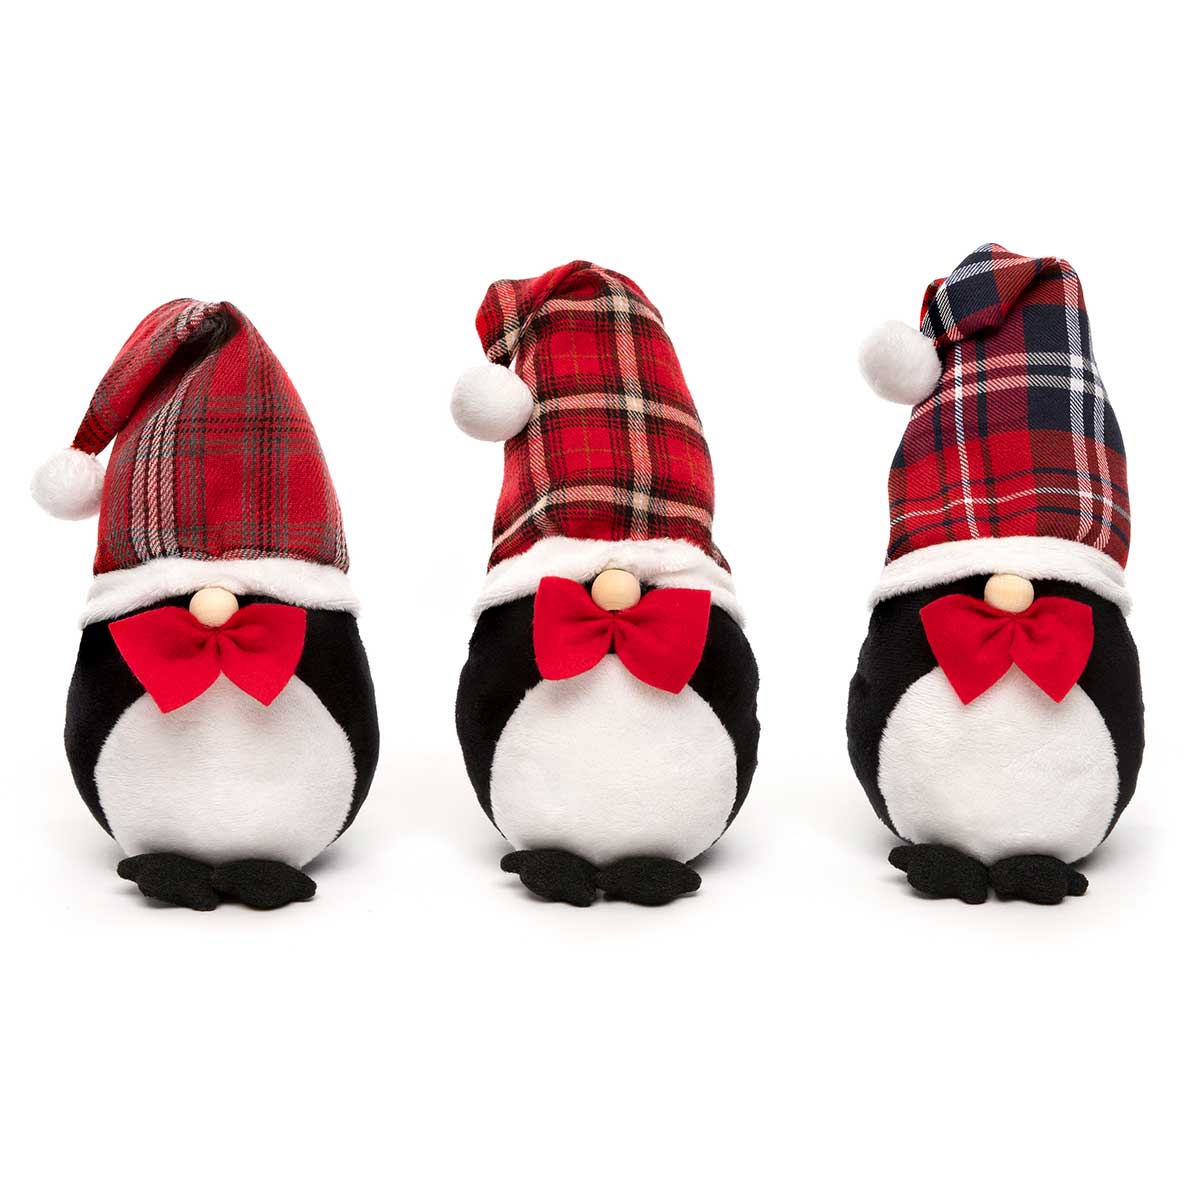 !PENGUIN PARADE GNOME WITH BOWTIE 3 AST LARGE